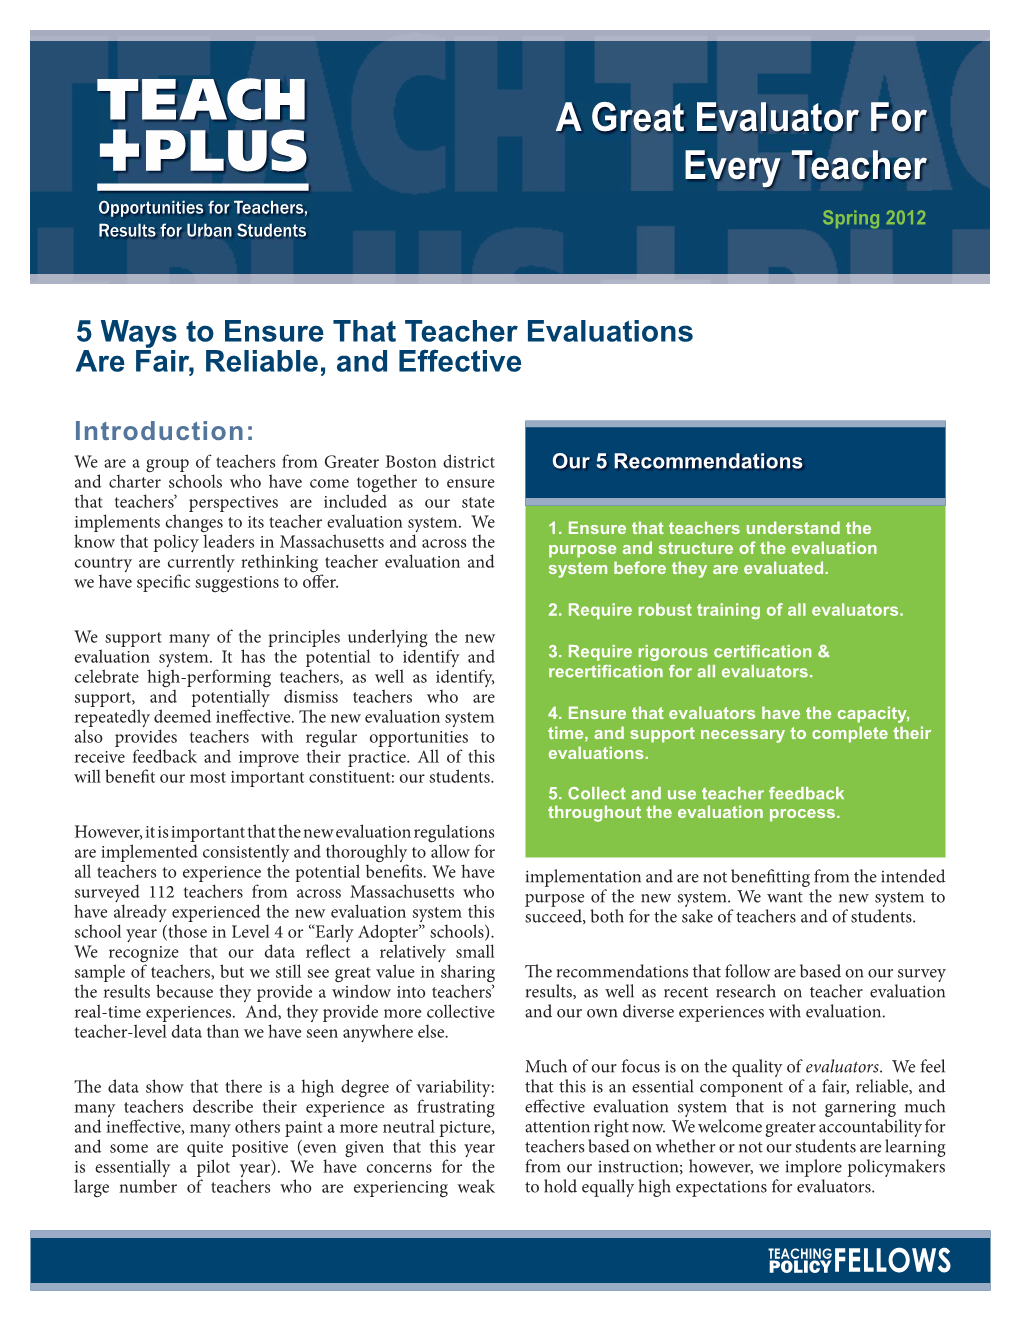 A Great Evaluator for Every Teacher